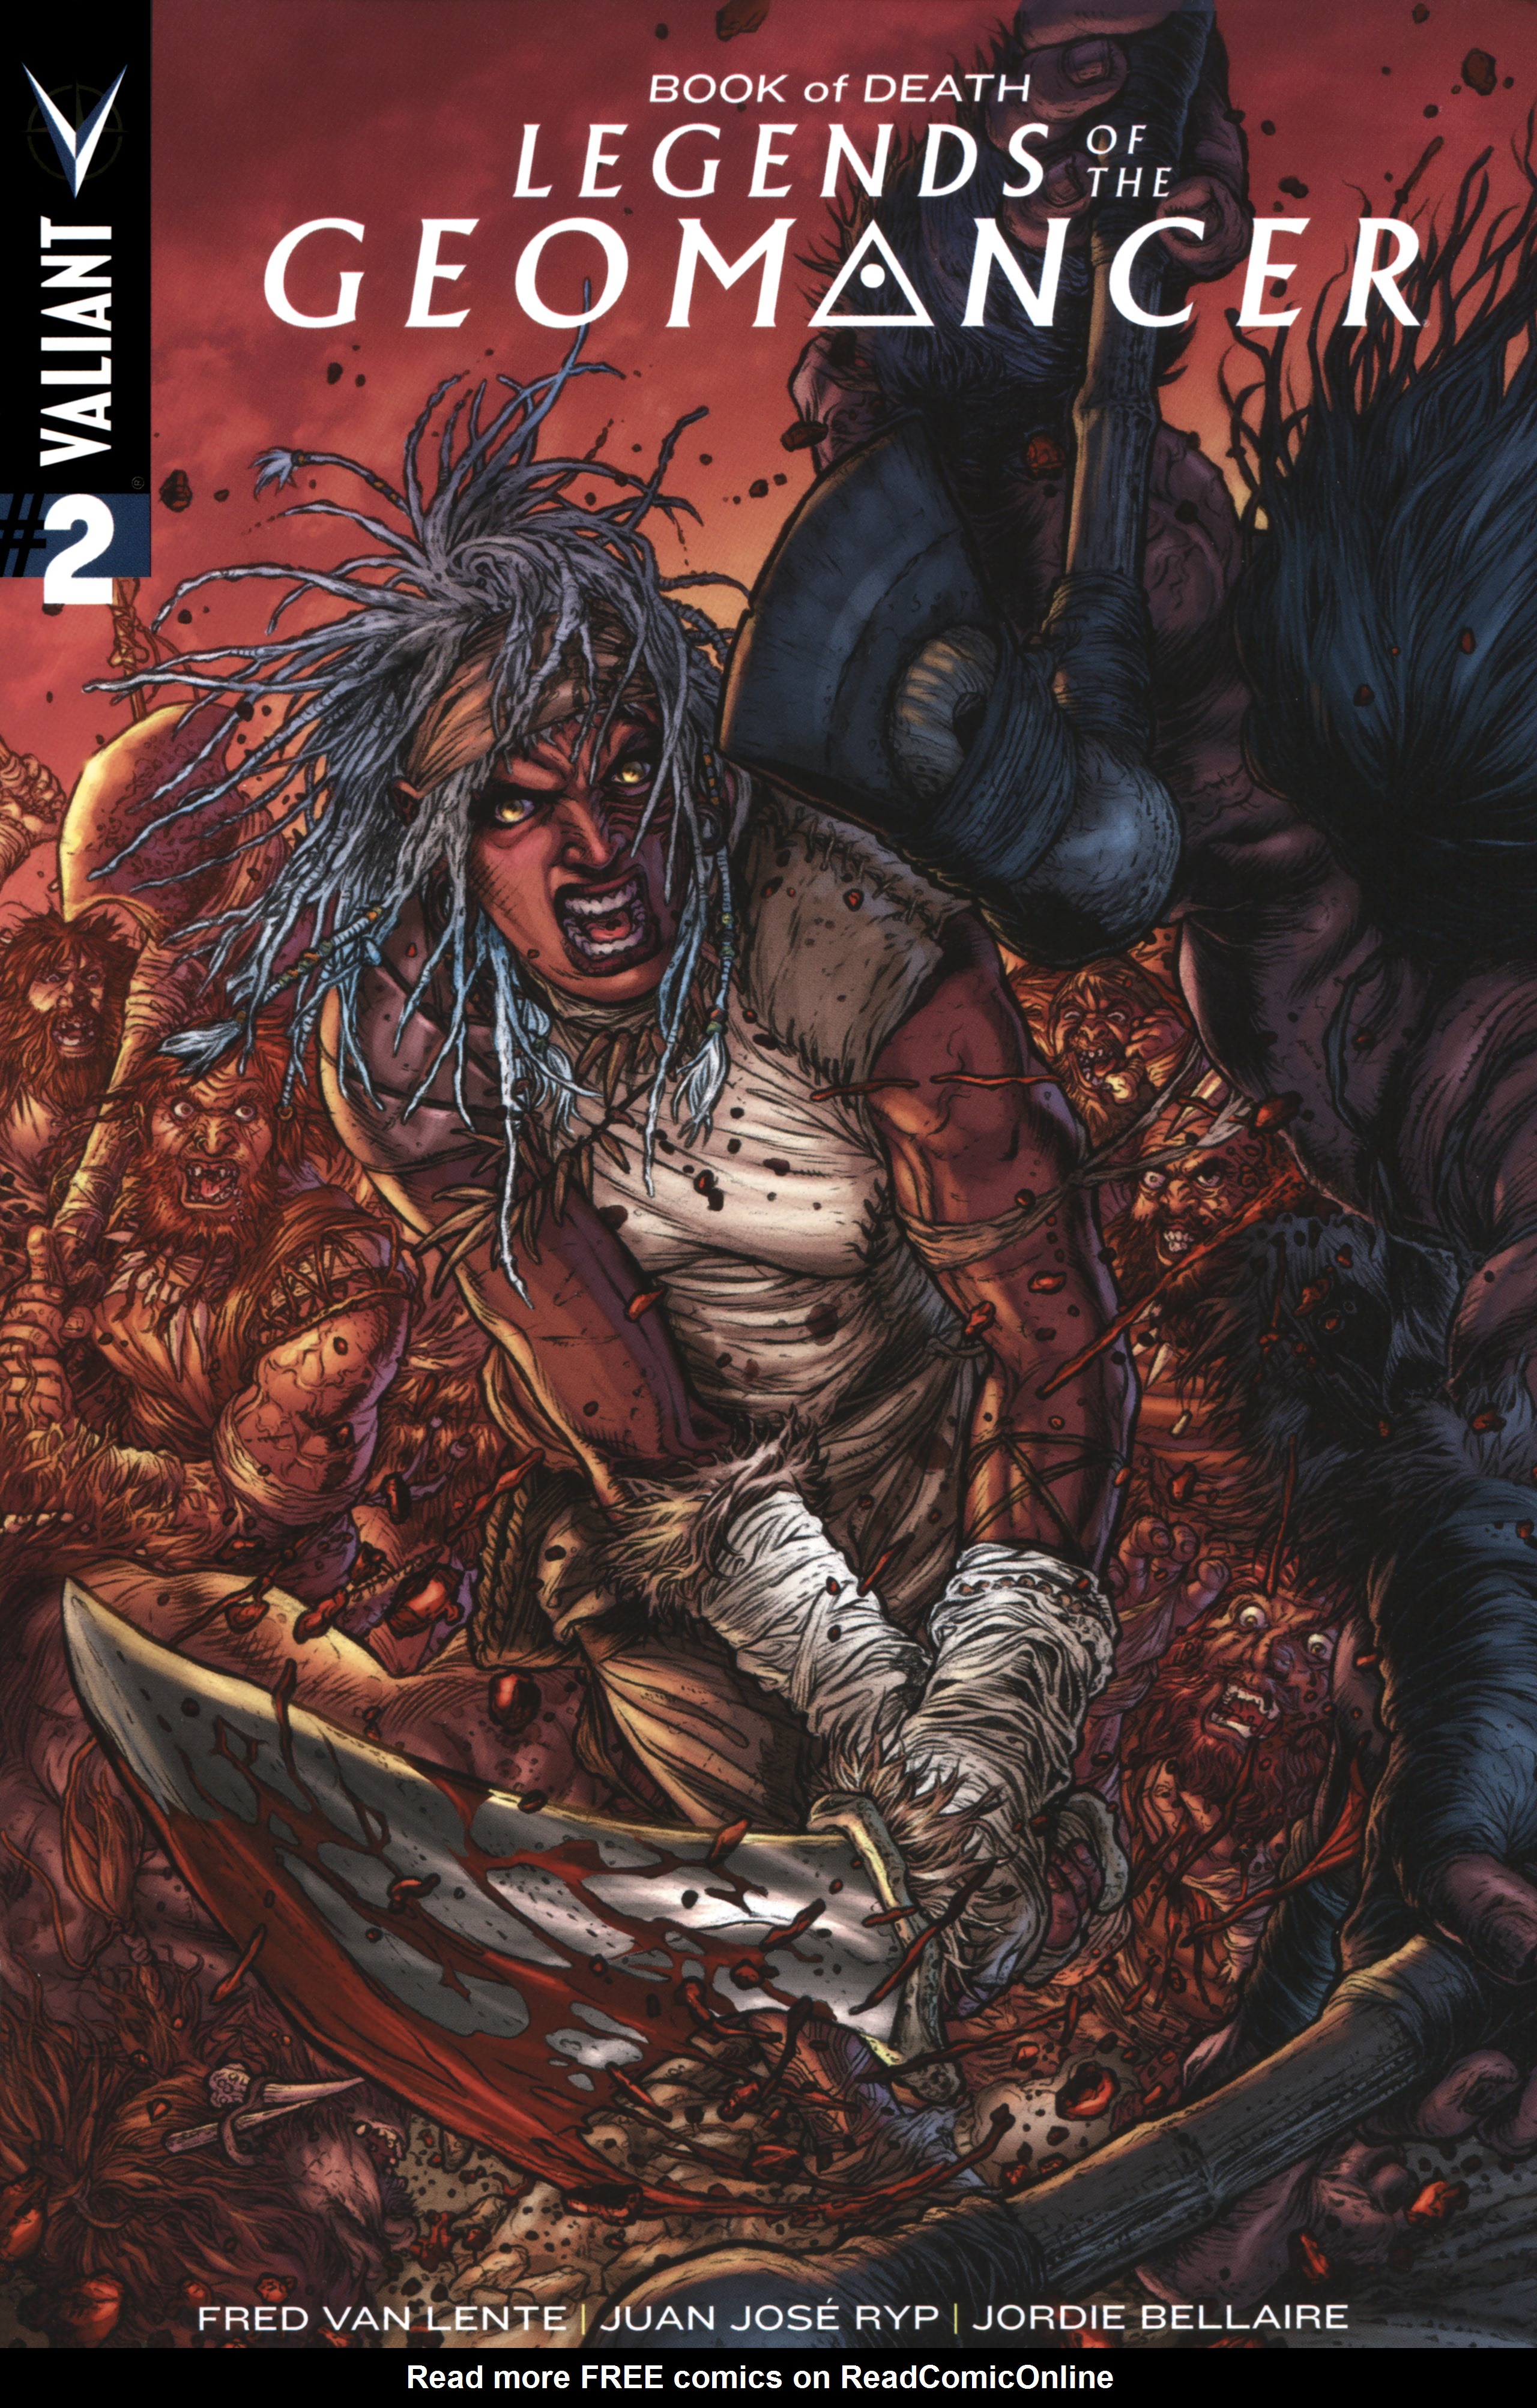 Read online Book of Death: Legends of the Geomancer comic -  Issue #2 - 1